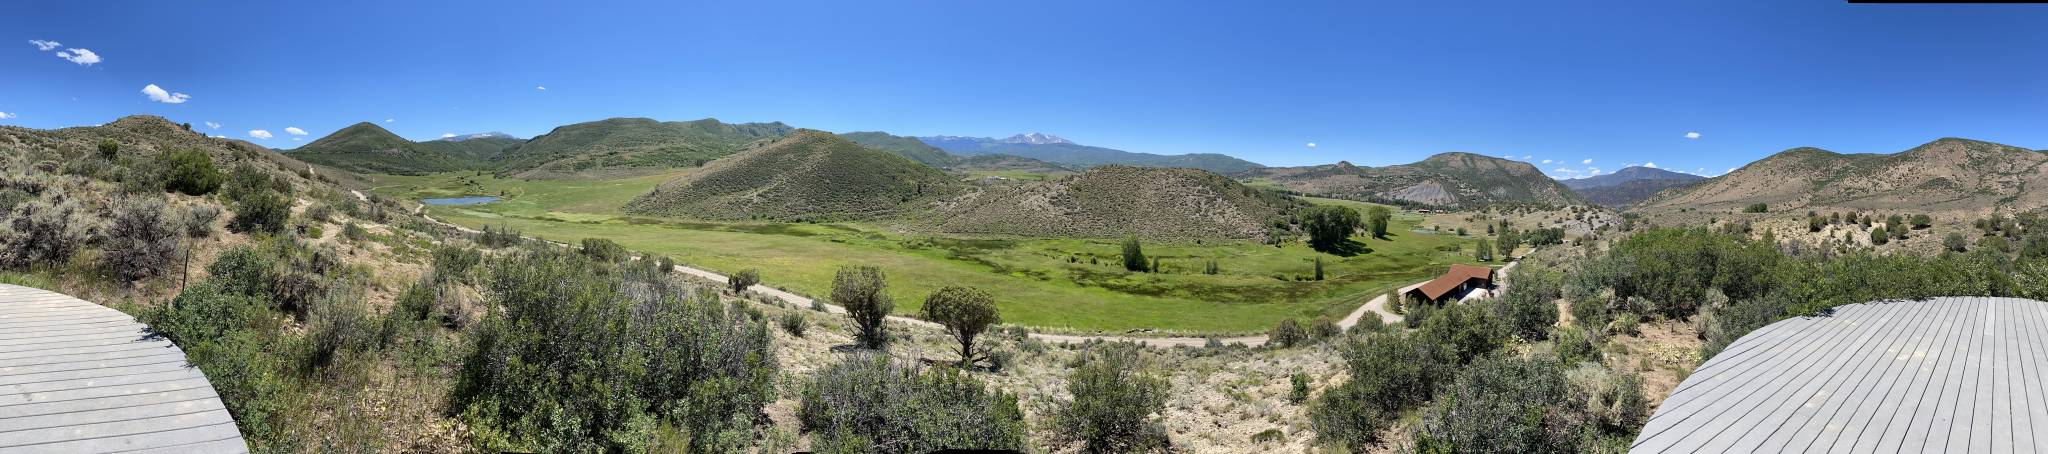 Panoramic View of the Windstar Property